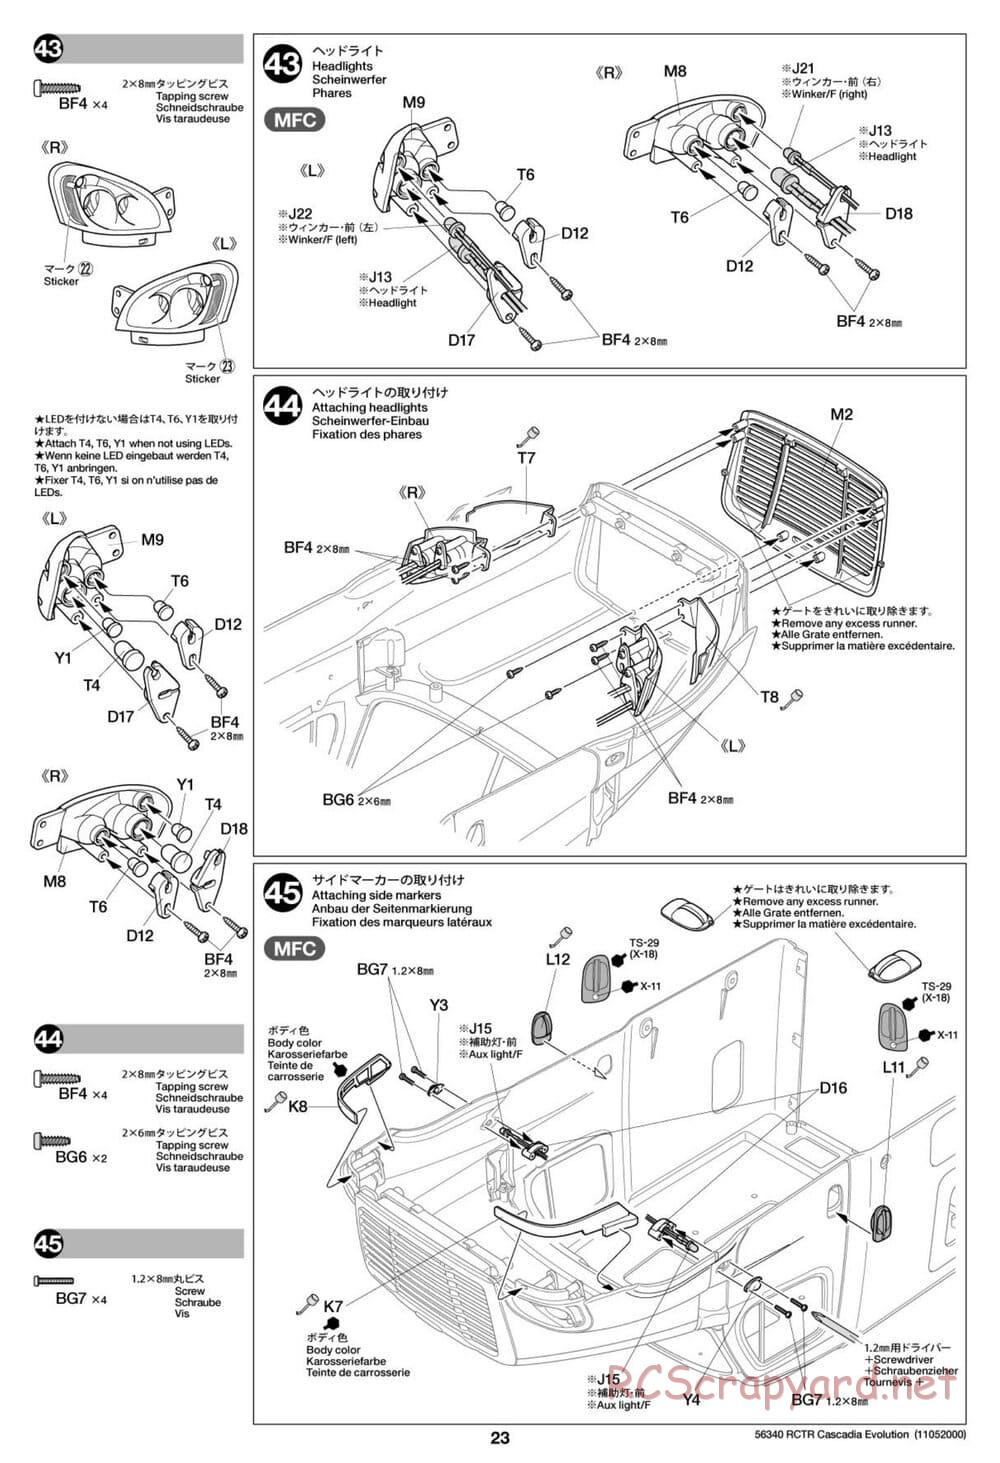 Tamiya - Freightliner Cascadia Evolution Tractor Truck Chassis - Manual - Page 23